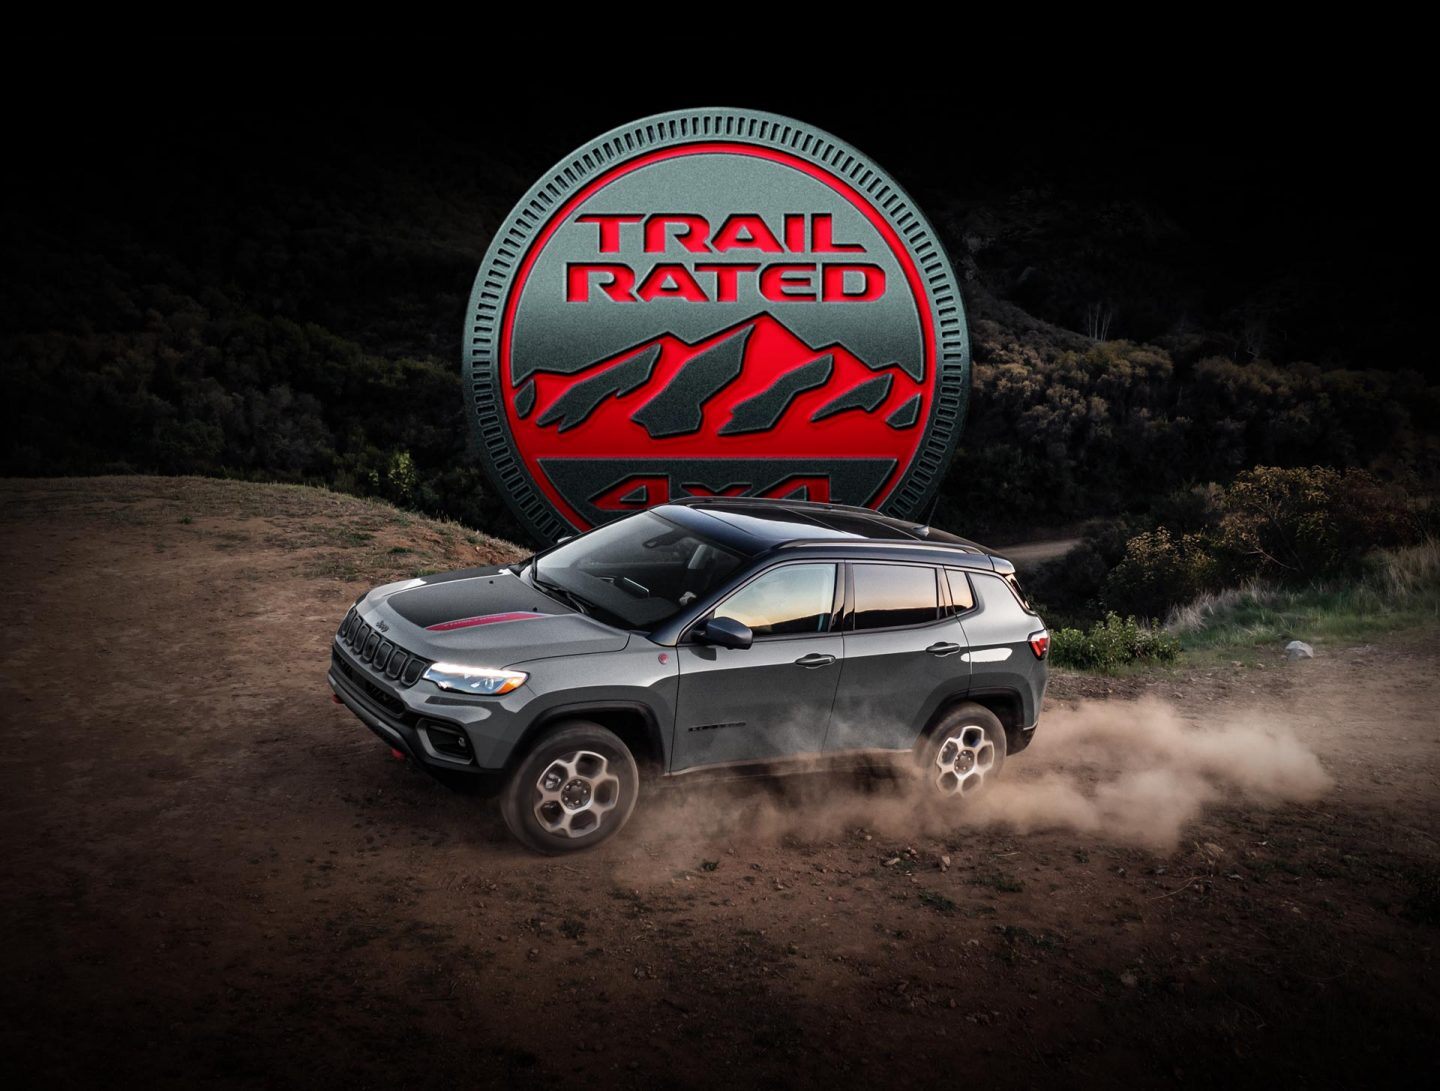 Trail Rated logo. The 2022 Jeep Compass Trailhawk being driven off-road on packed earth with dust rising from its wheels.